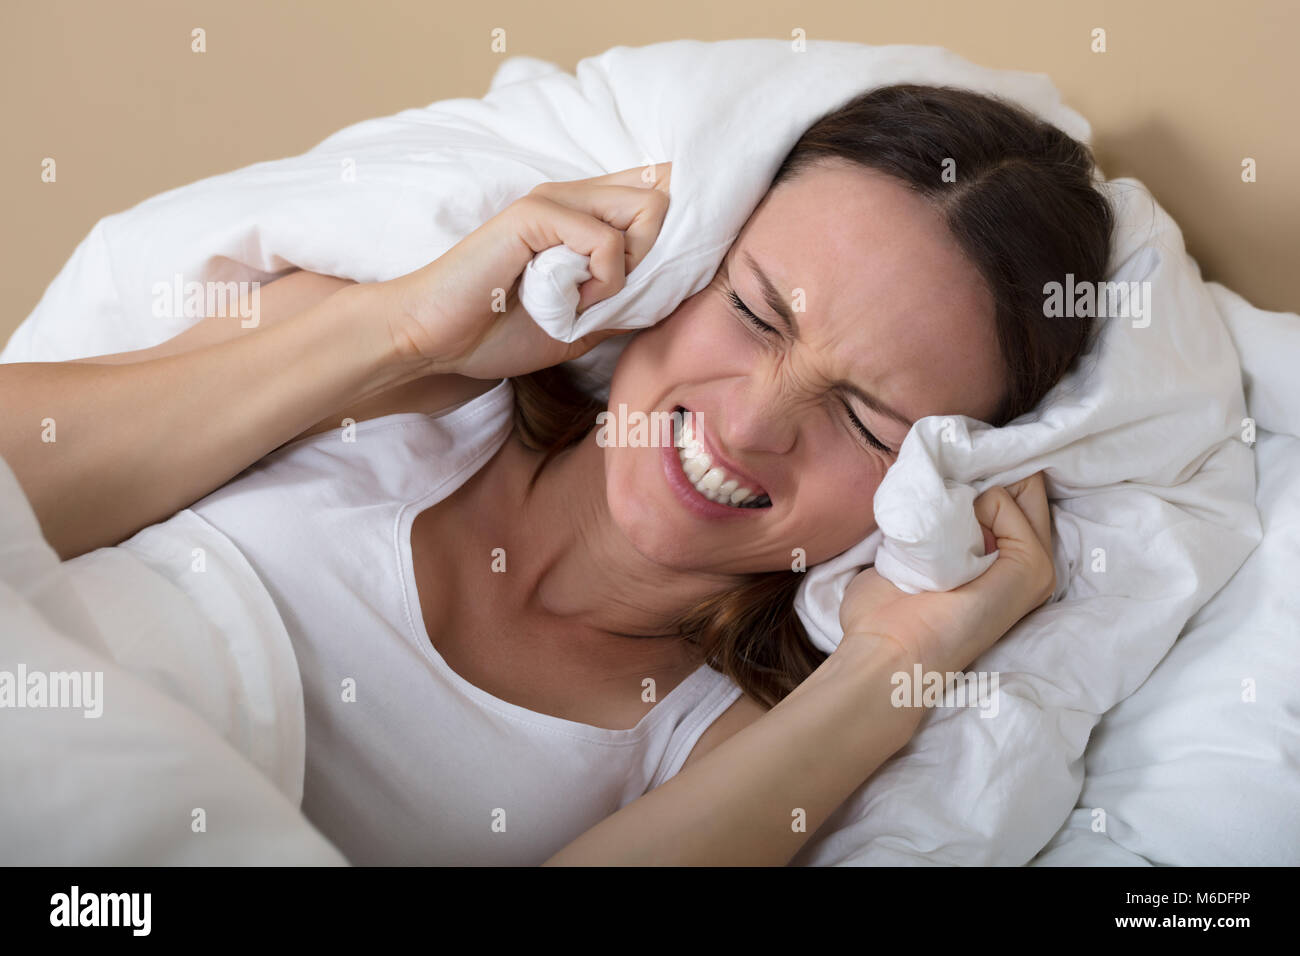 Troubled Woman In Bed Covering Ears To Shut Out Noise Stock Photo